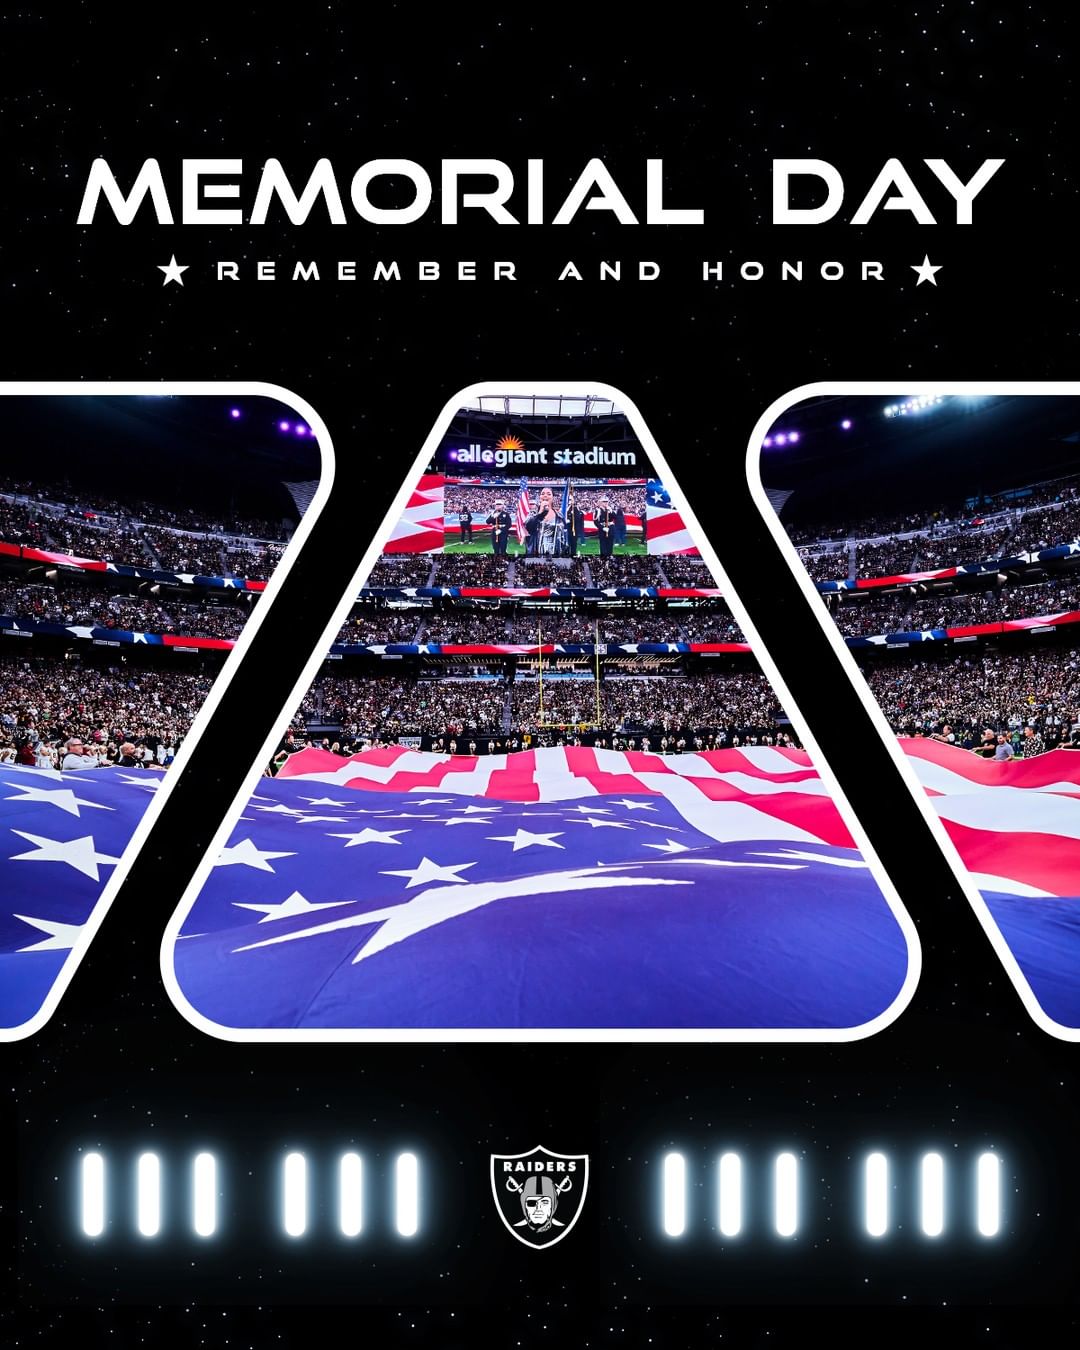 Today we honor the brave men and women who have made the ultimate sacrifice to p...